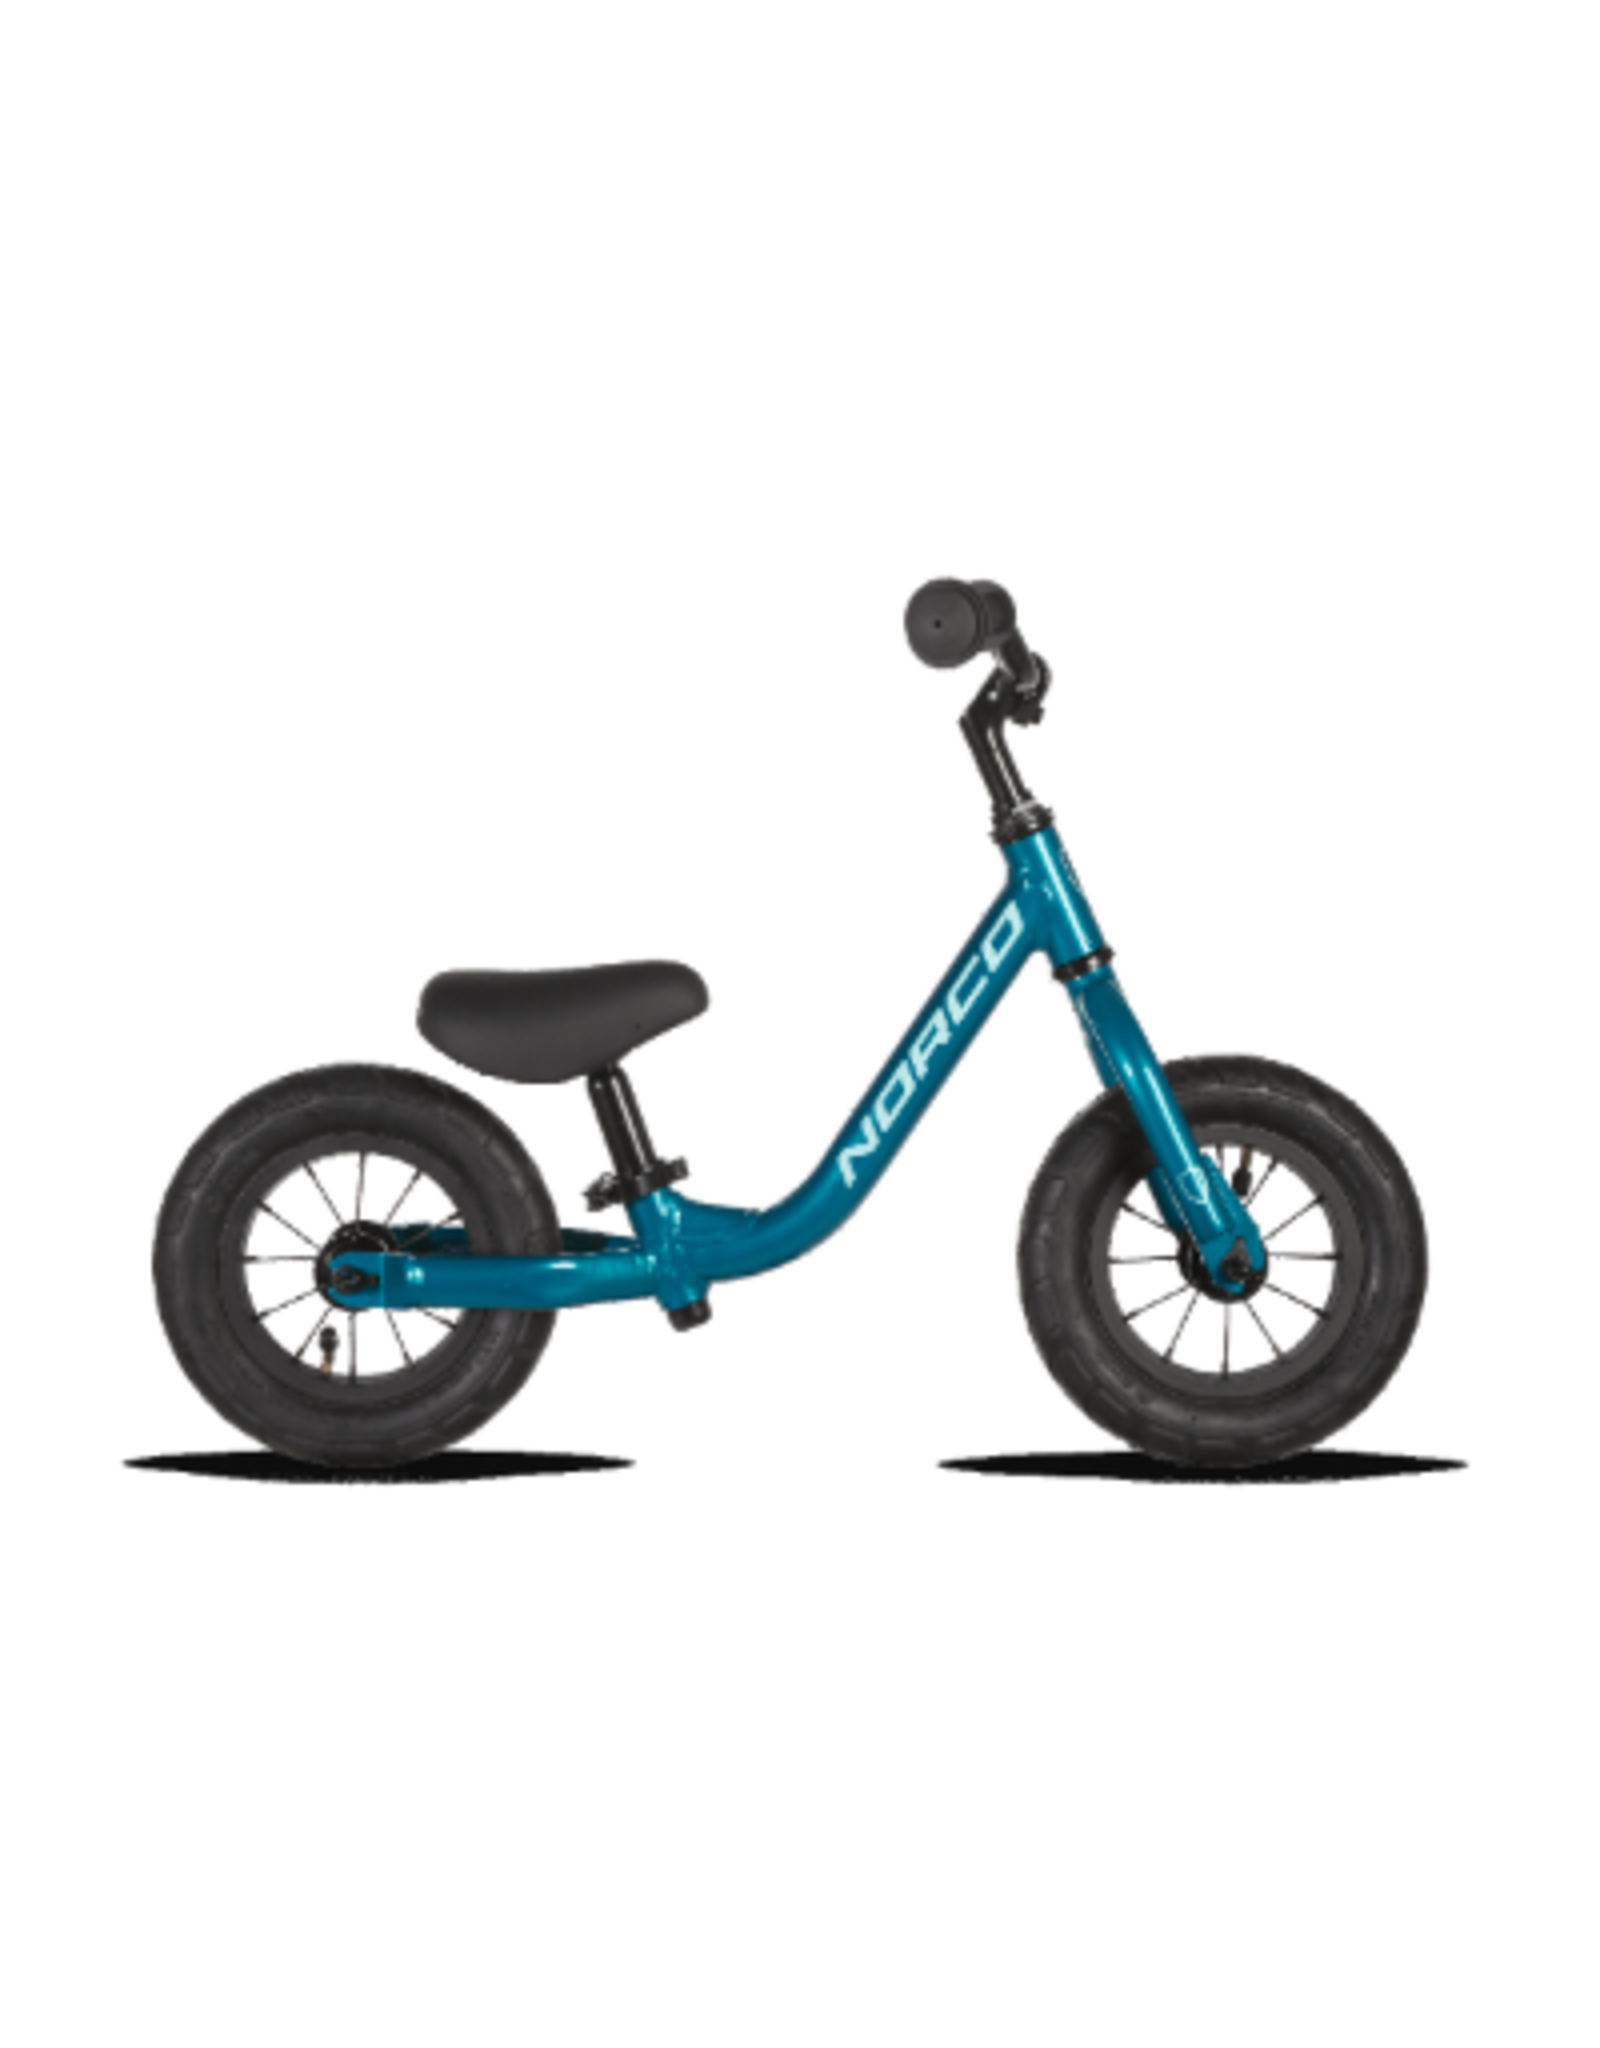 NORCO NORCO YOUTH 10" RUNNER BALANCE BIKE BLUE/BLUE